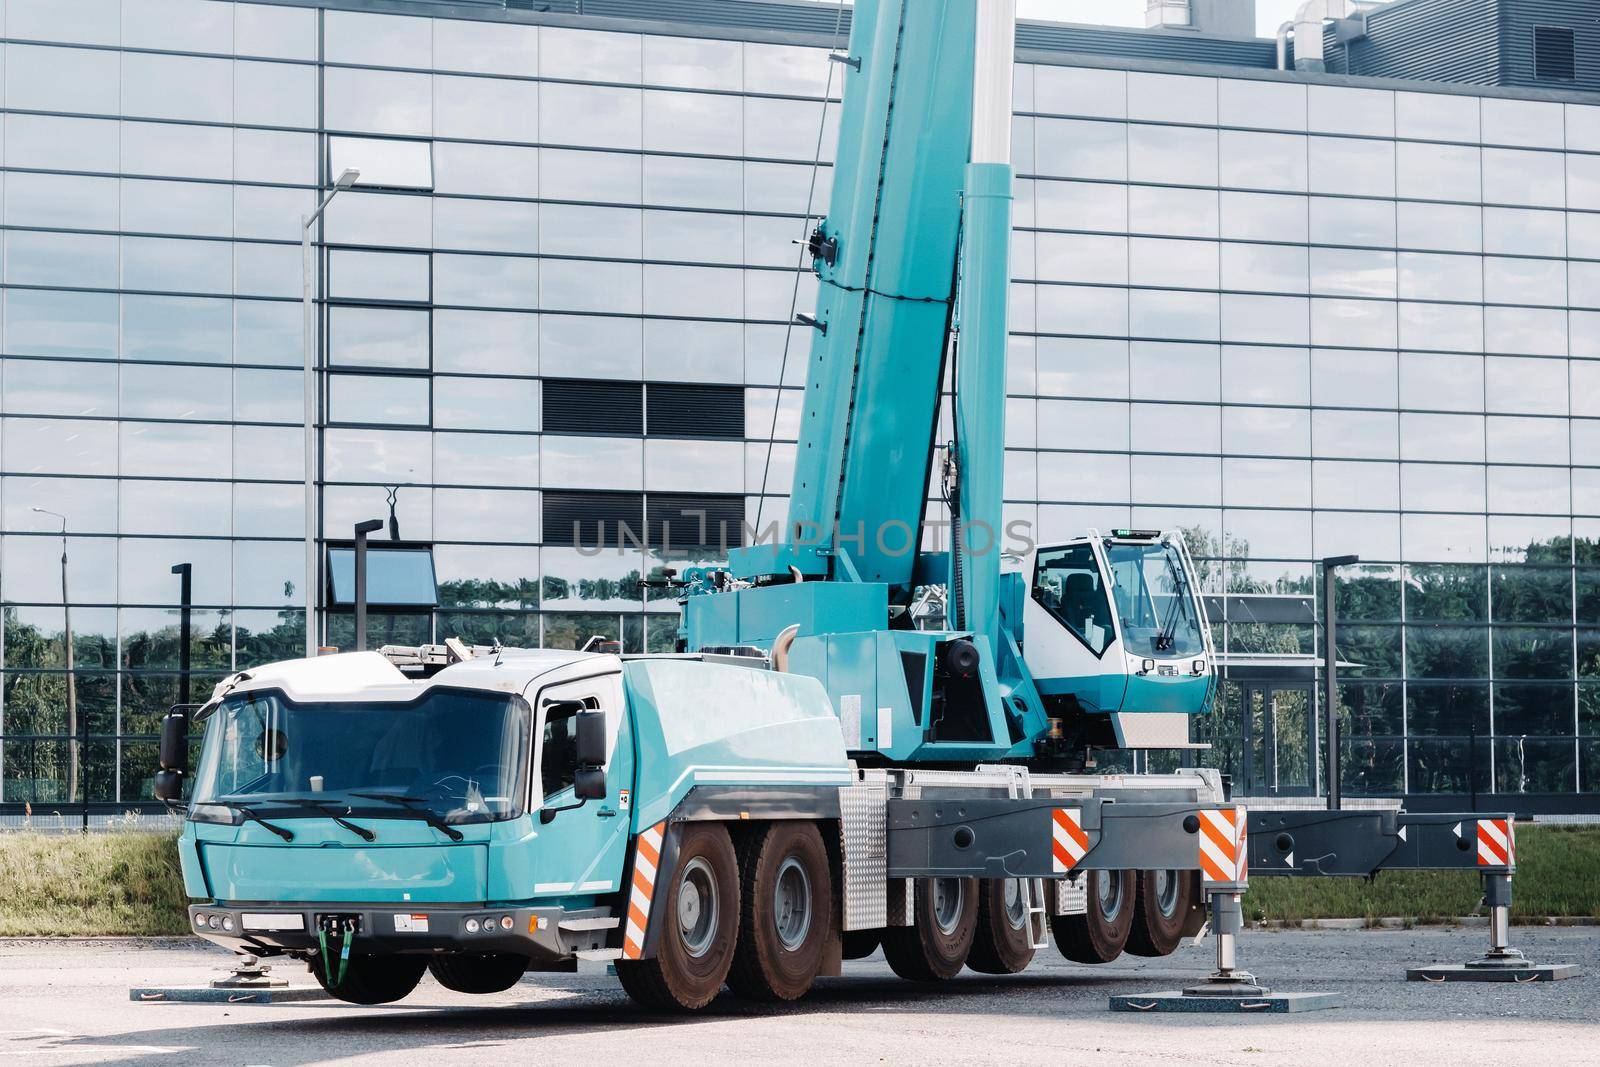 A large blue truck crane stands ready to operate on hydraulic supports on a platform next to a large modern building. The largest truck crane for solving complex tasks. by Lobachad